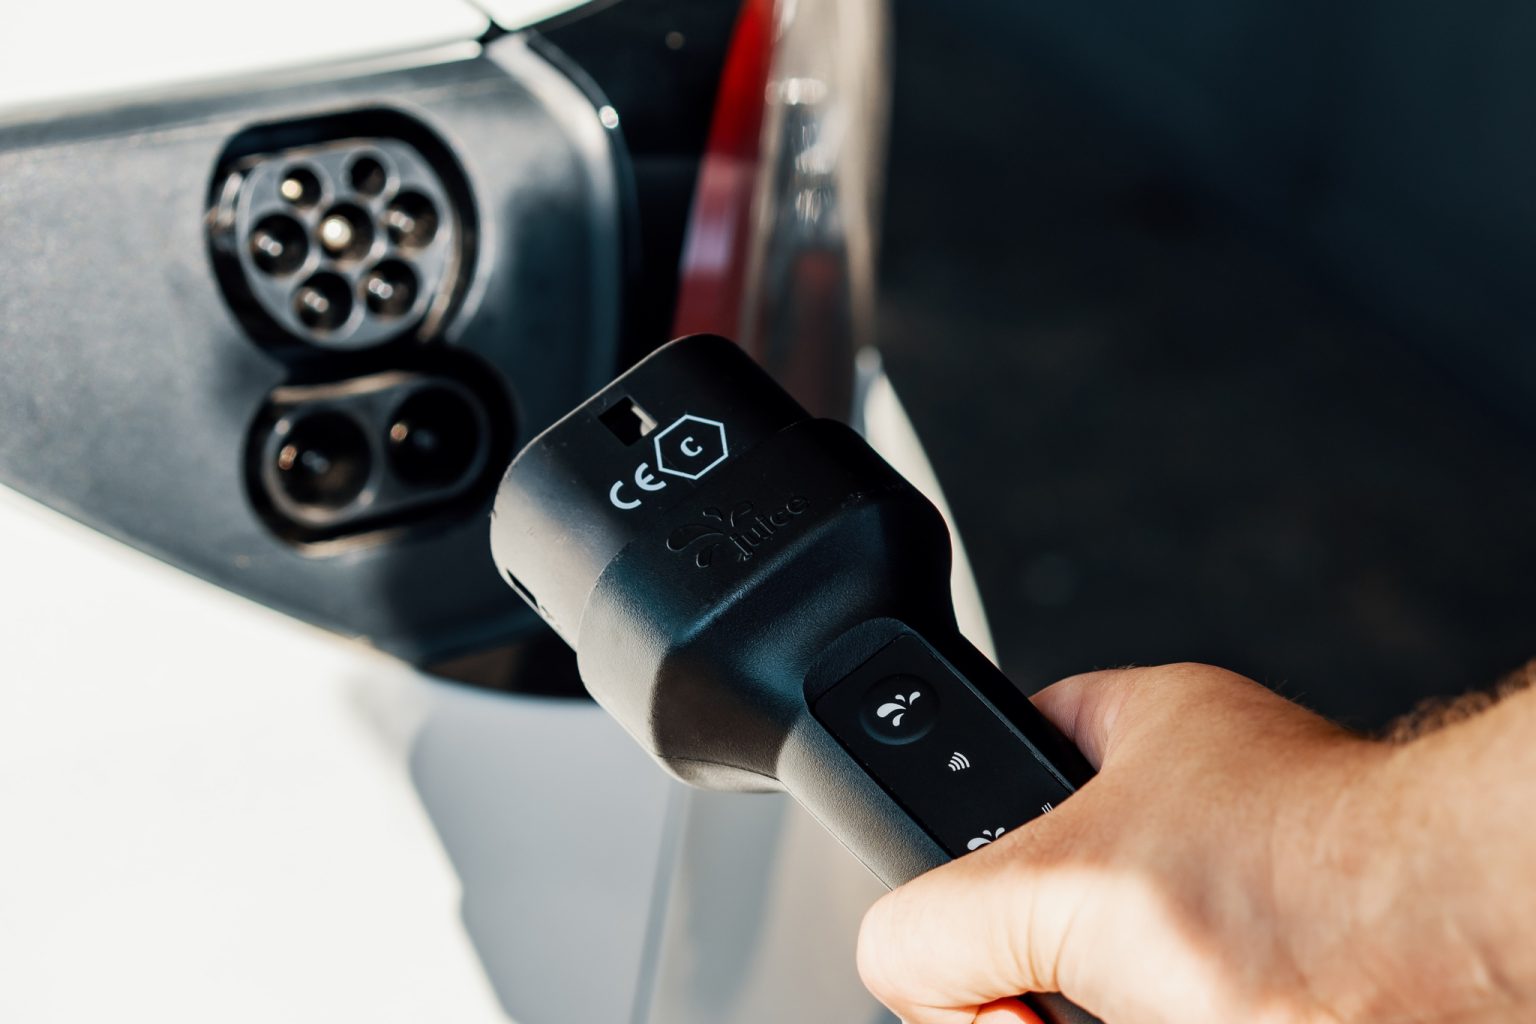 Brampton to build 176 new electric vehicle charging stations by 2024